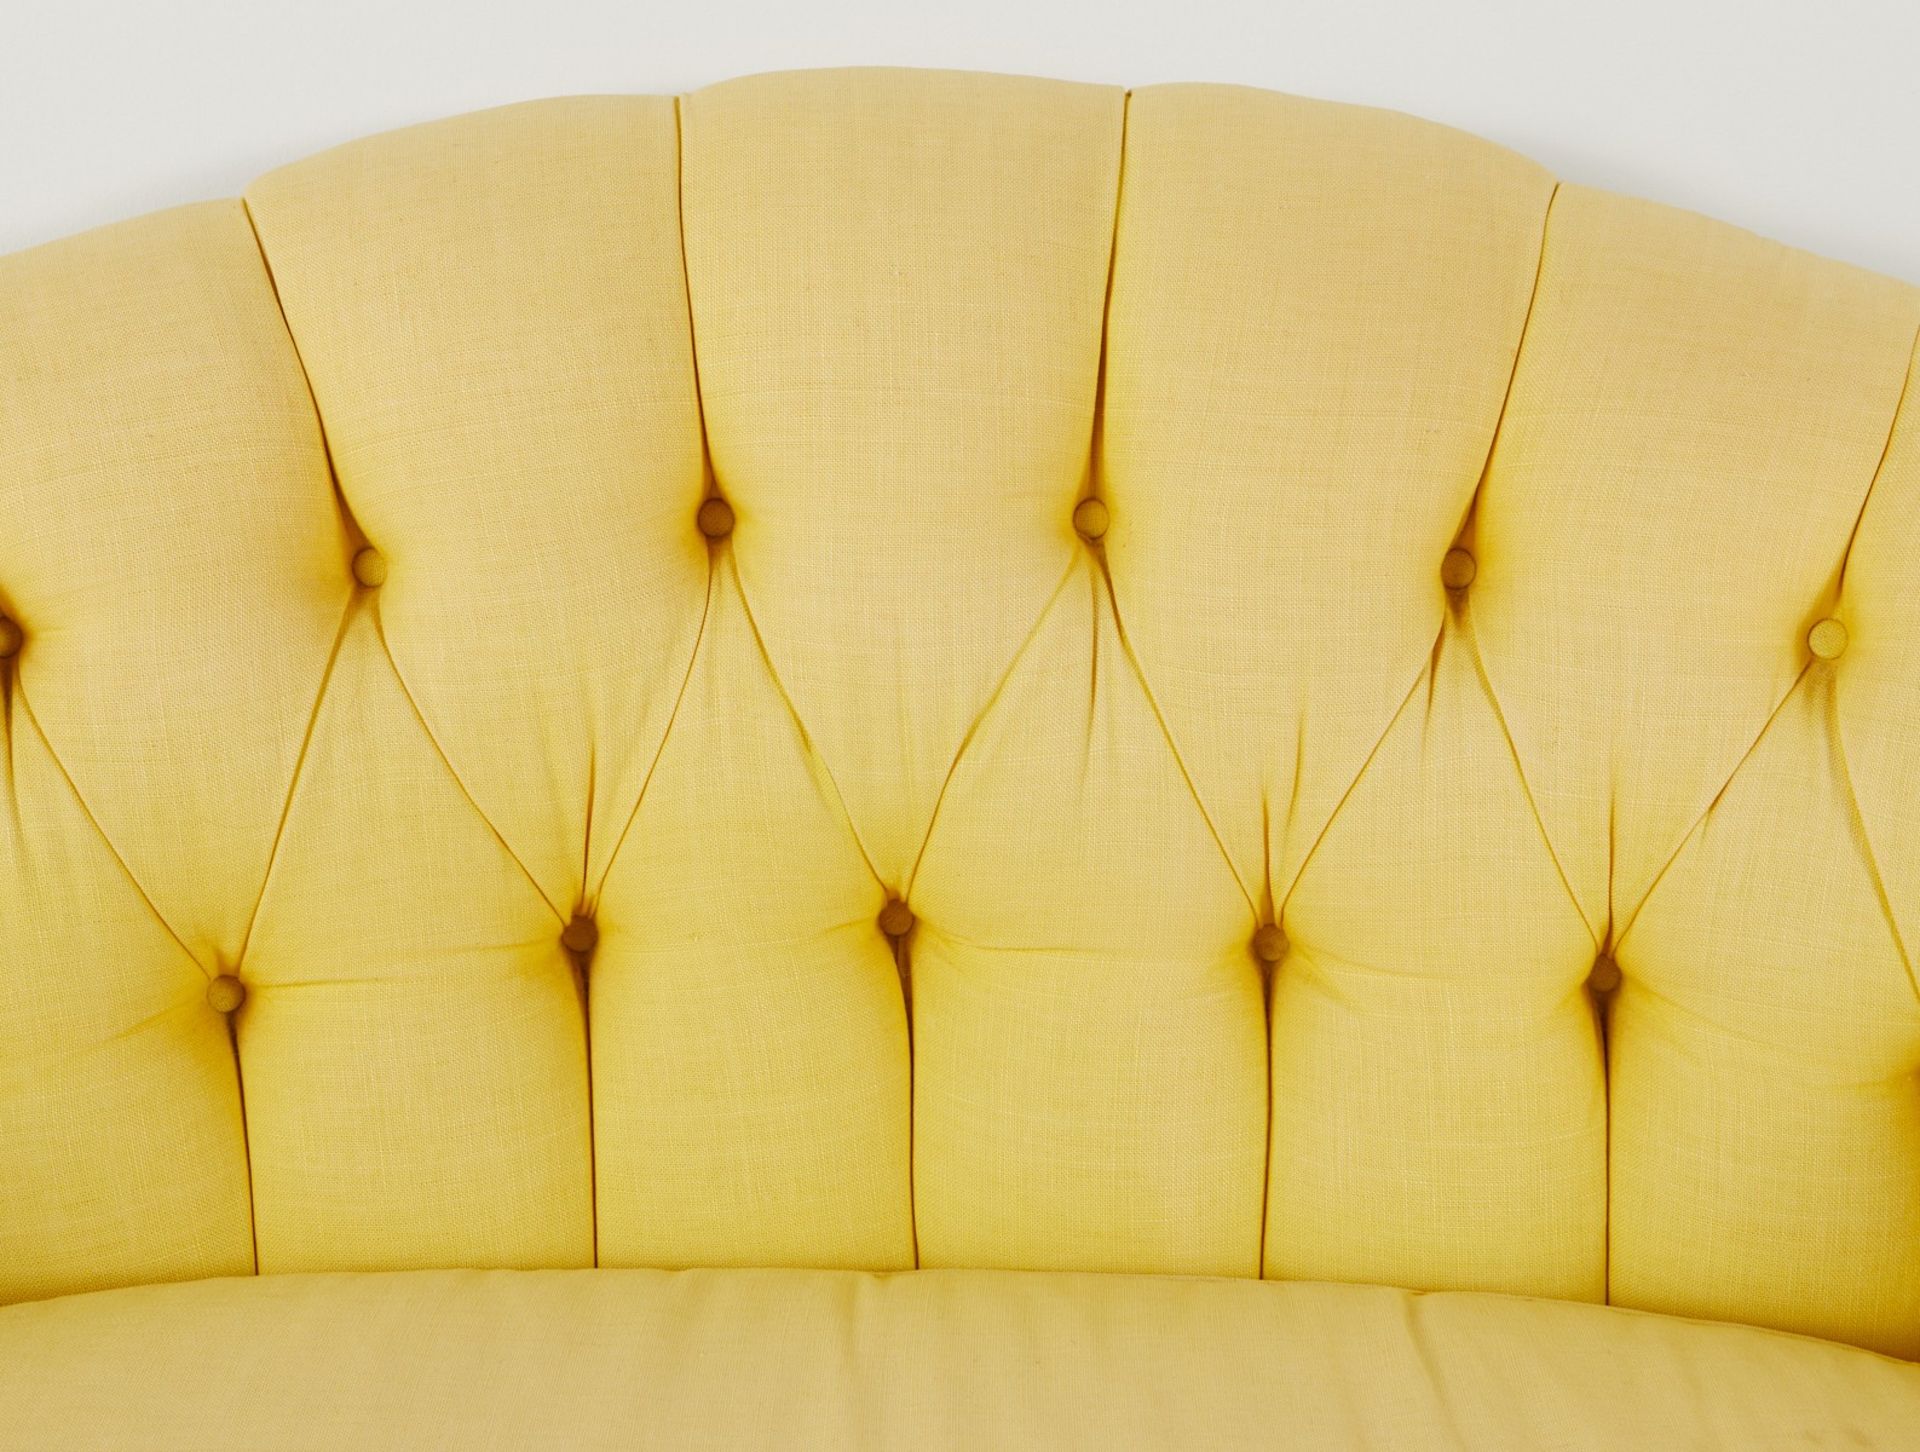 19th c. French Settee w/ Yellow Upholstery - Image 2 of 6